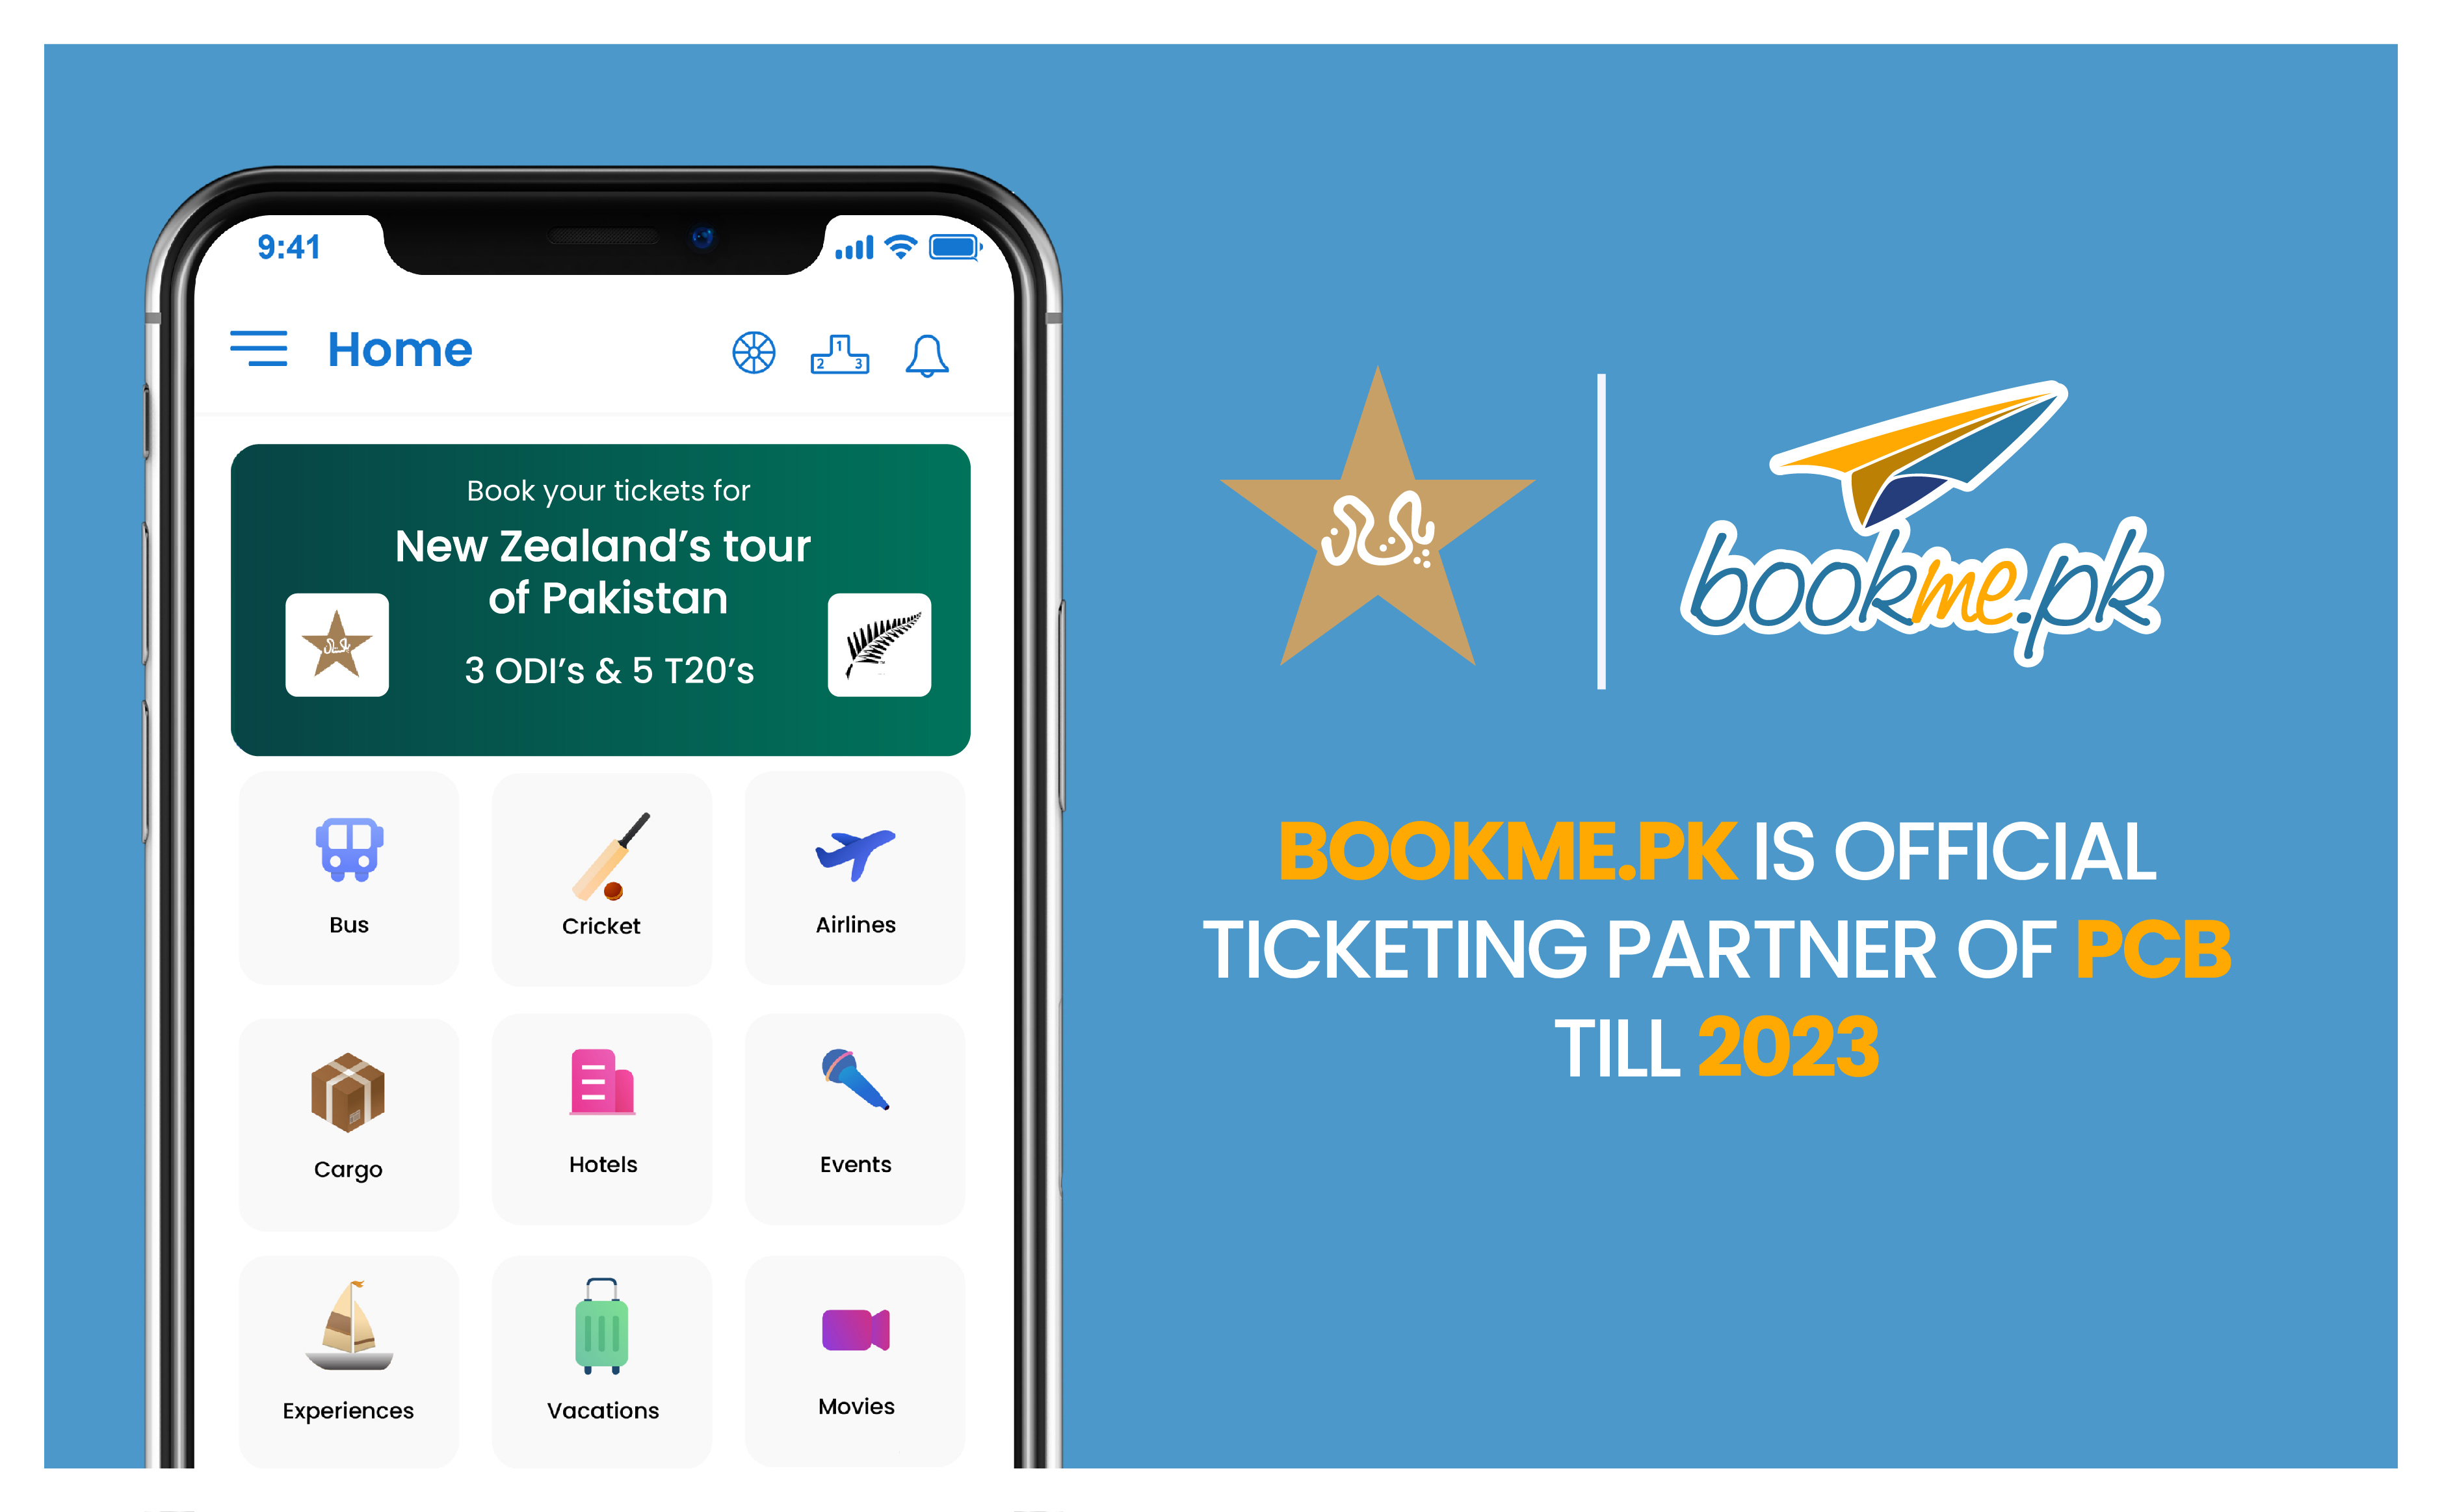 Bookme is the Official and Exclusive ticketing partner of PCB for the